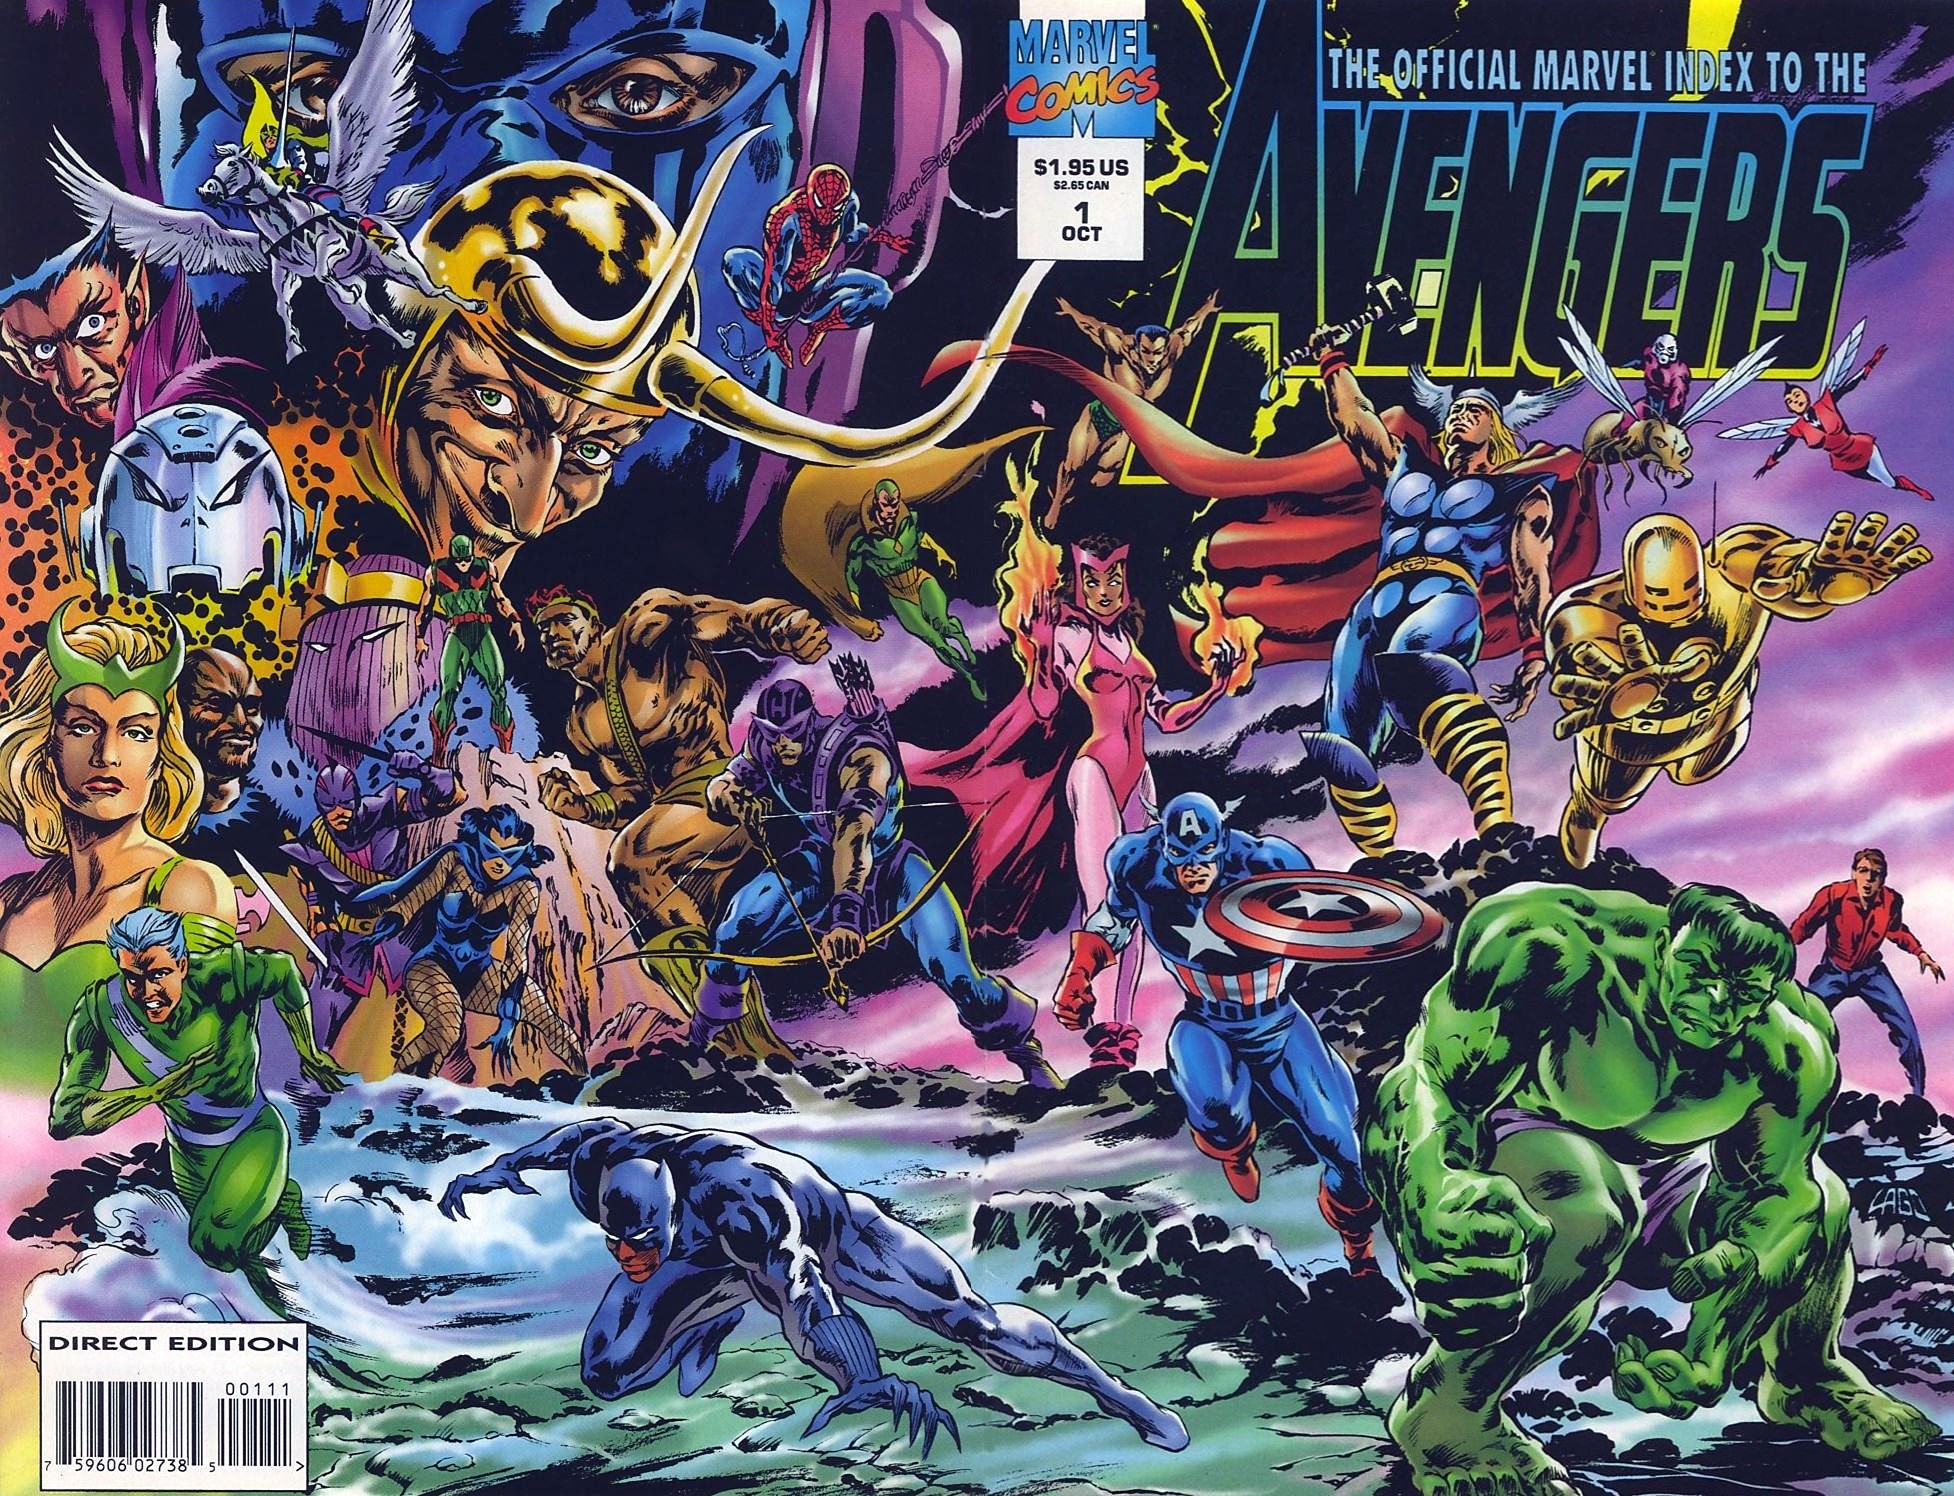 Read online The Official Marvel Index to the Avengers comic -  Issue #1 - 1